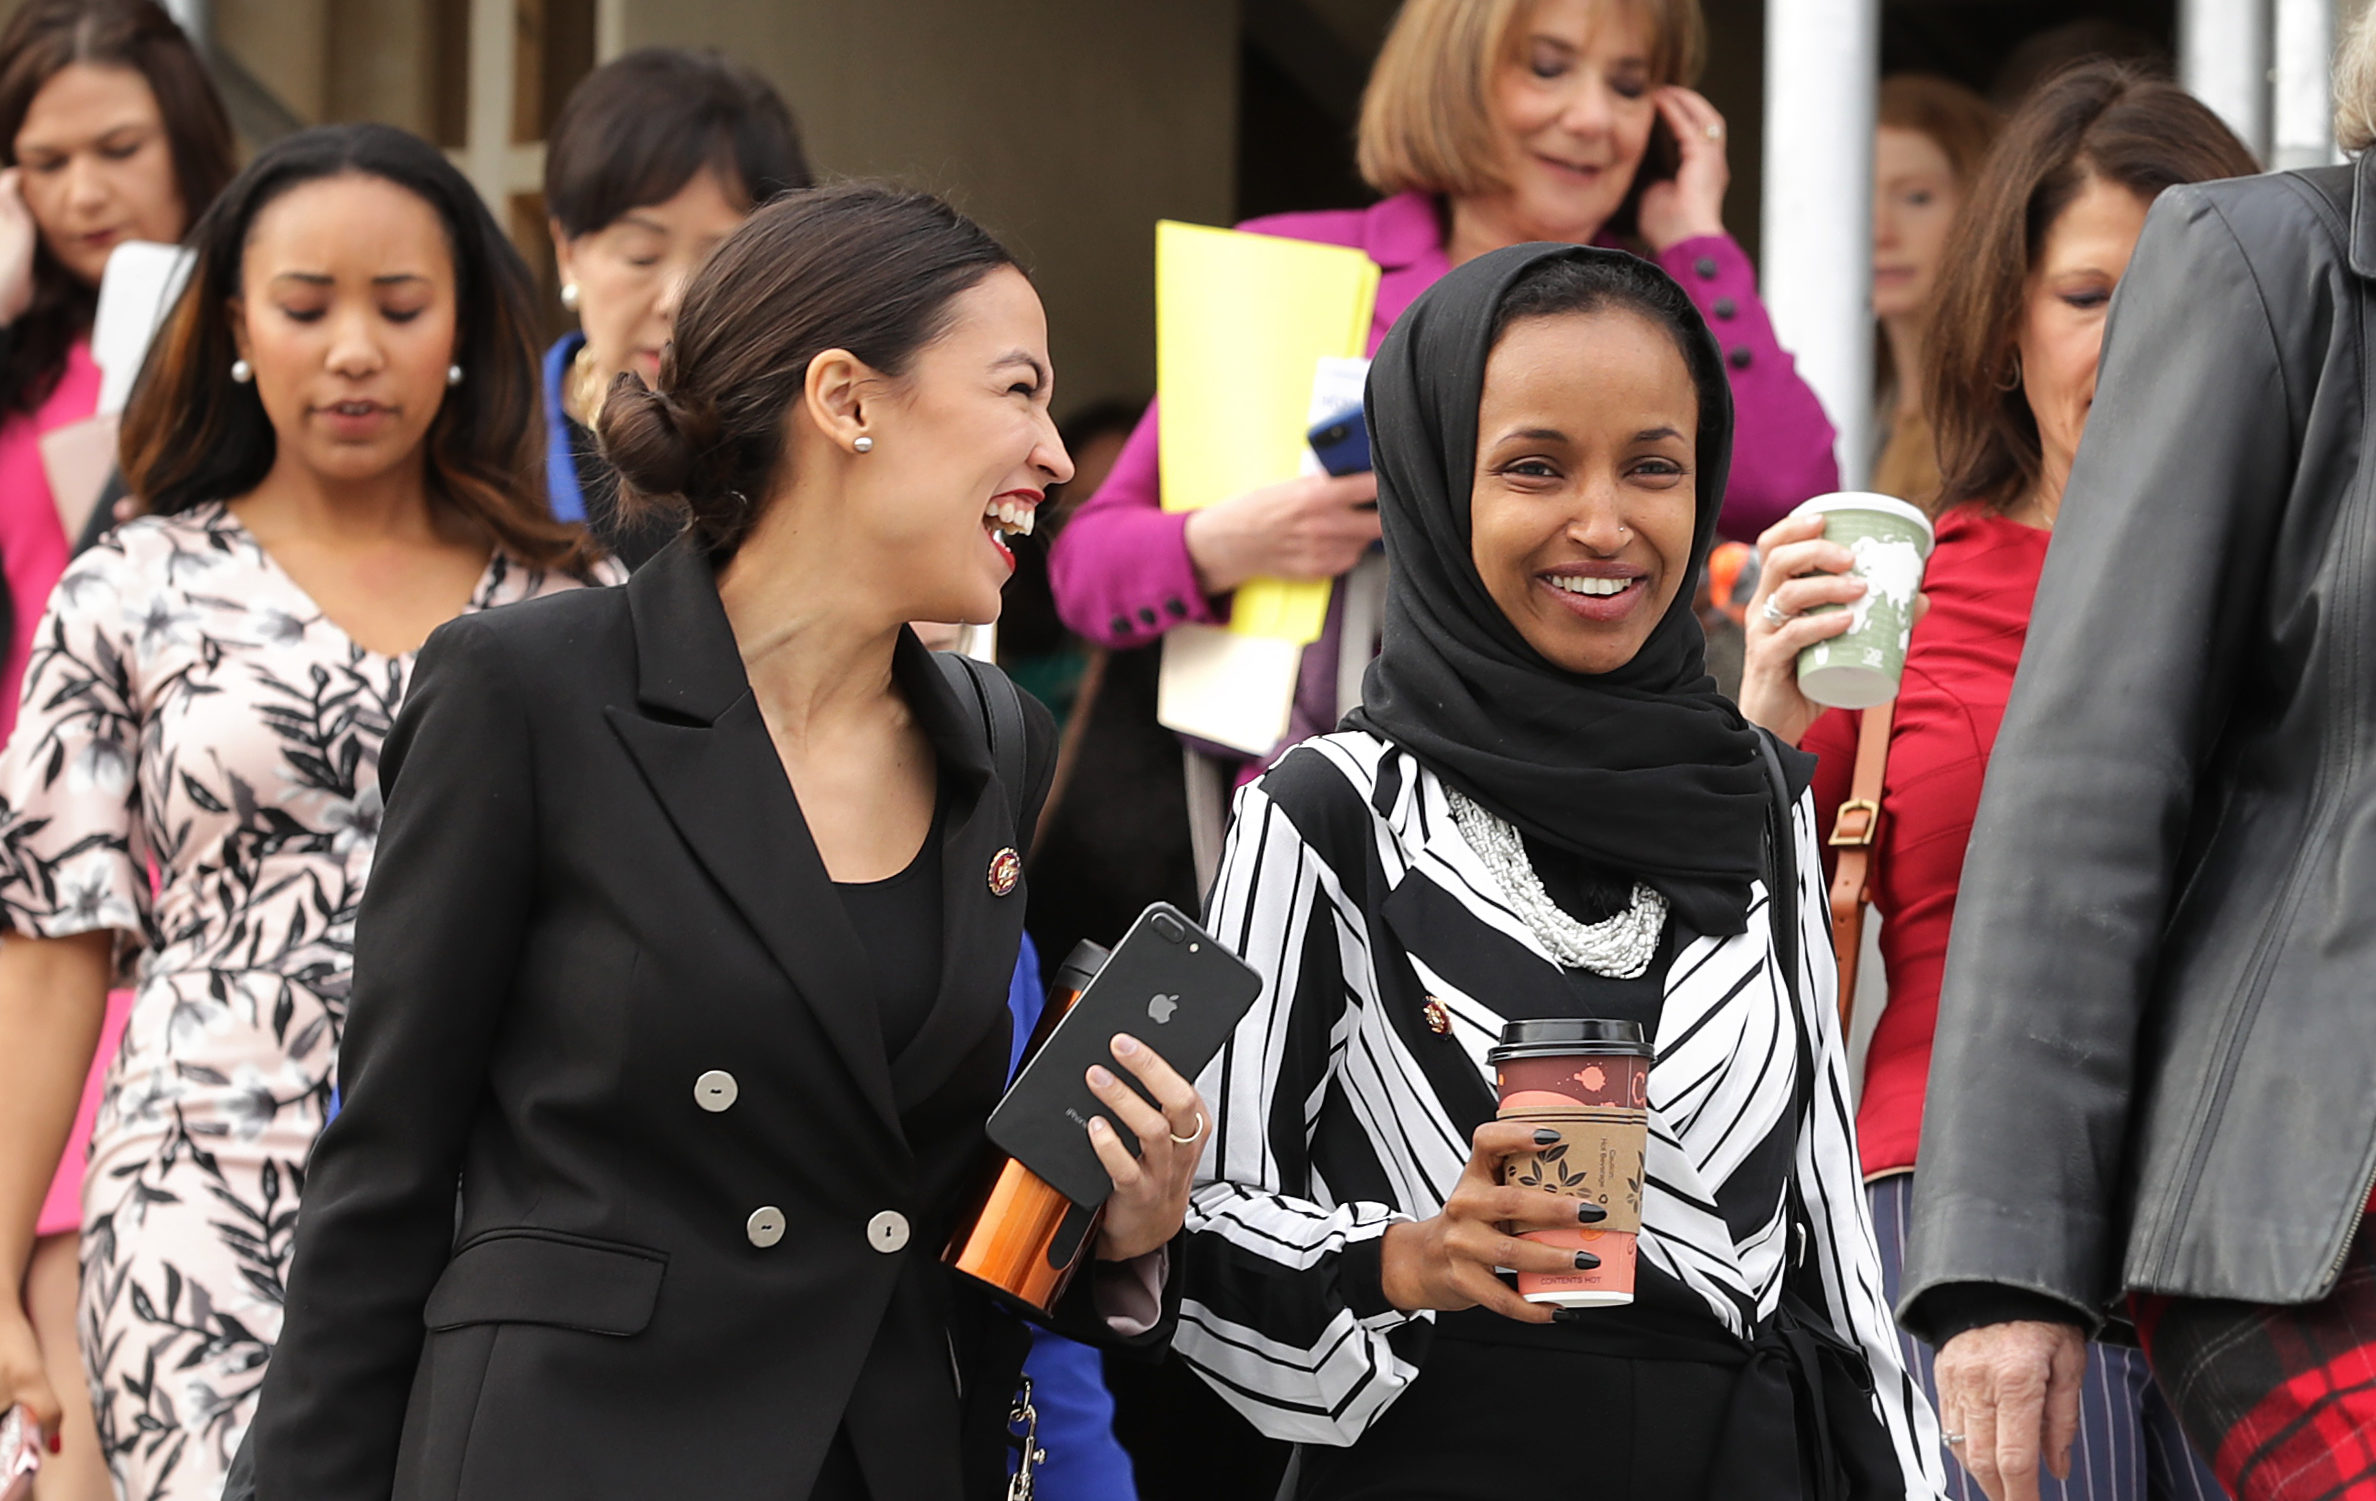 Rep. Alexandria Ocasio-Cortez (D-NY) (L) and Rep. Ilhan Omar (D-MN) (C) join their fellow House Democratic women for a portrait in front of the U.S. Capitol January 04, 2019 in Washington, DC. Chip Somodevilla/Getty Images